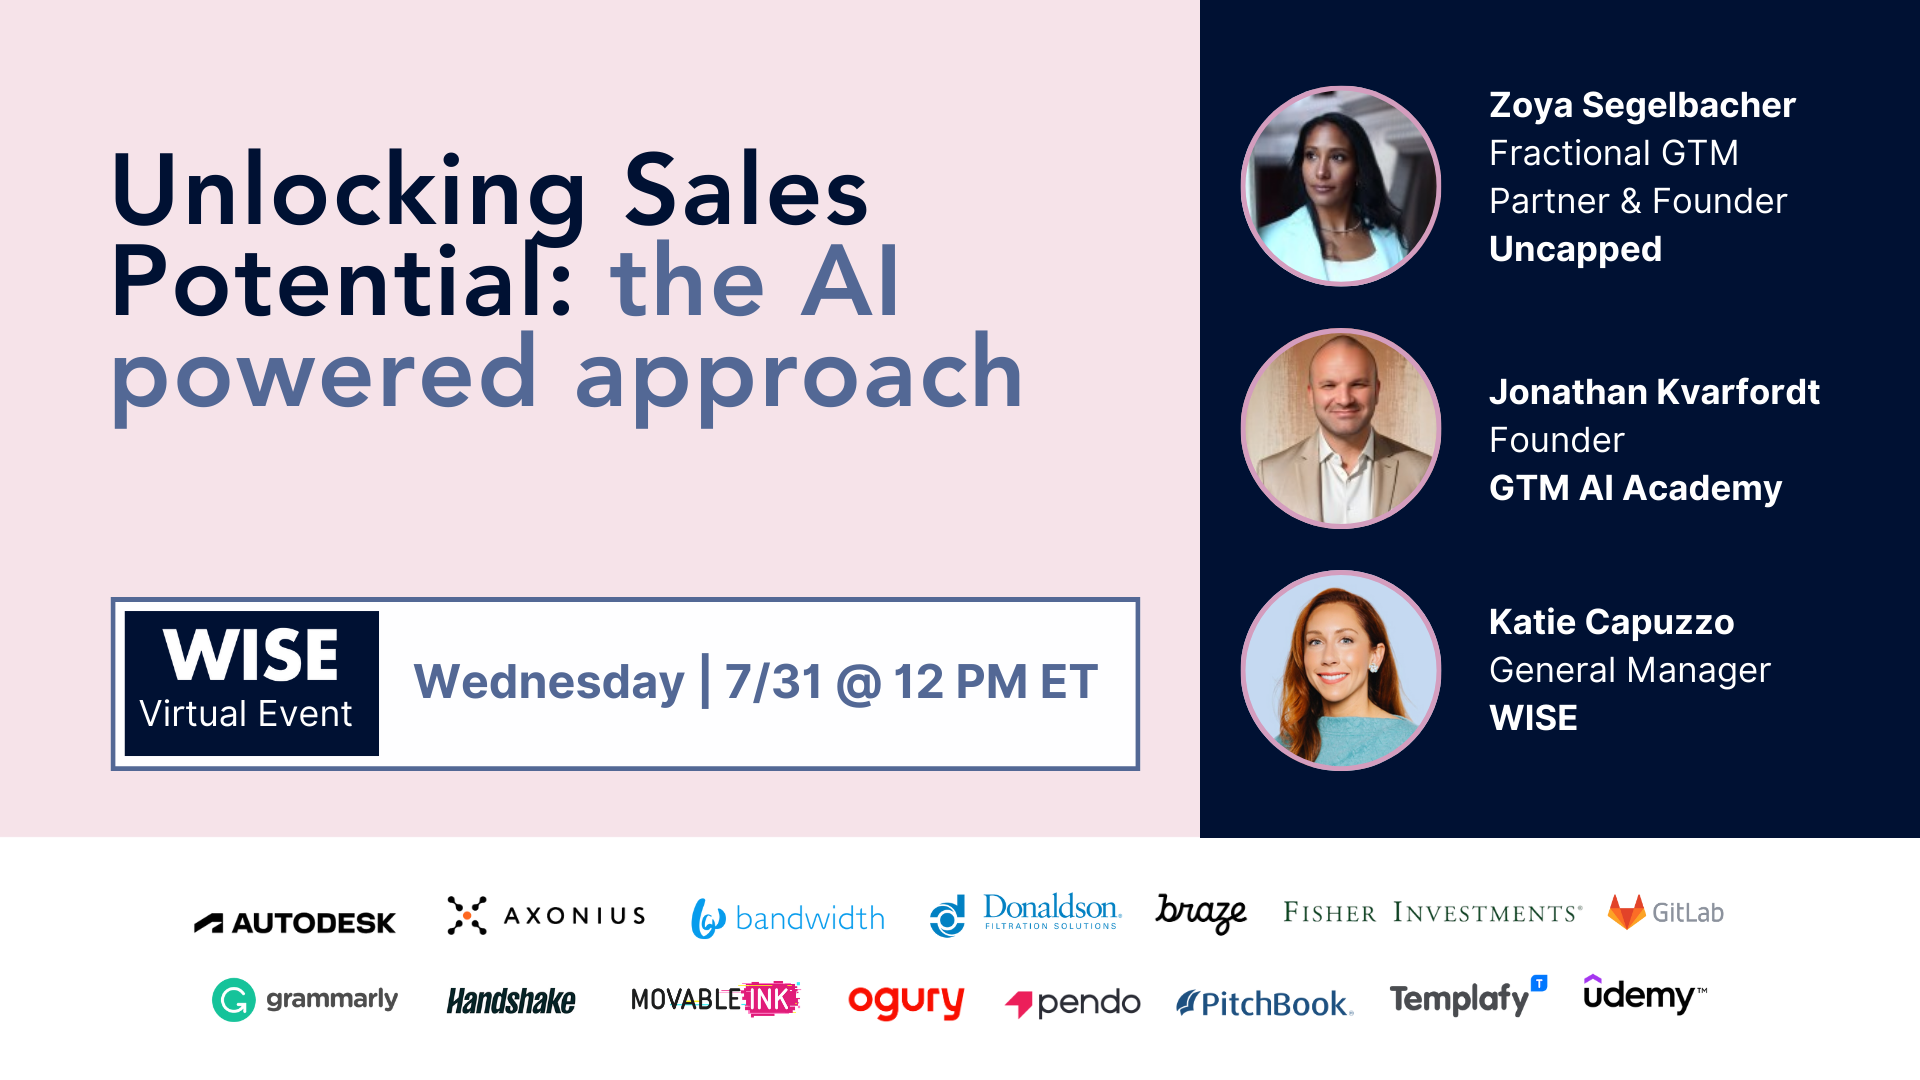 Unlocking Sales Potential: the AI powered approach event cover photo